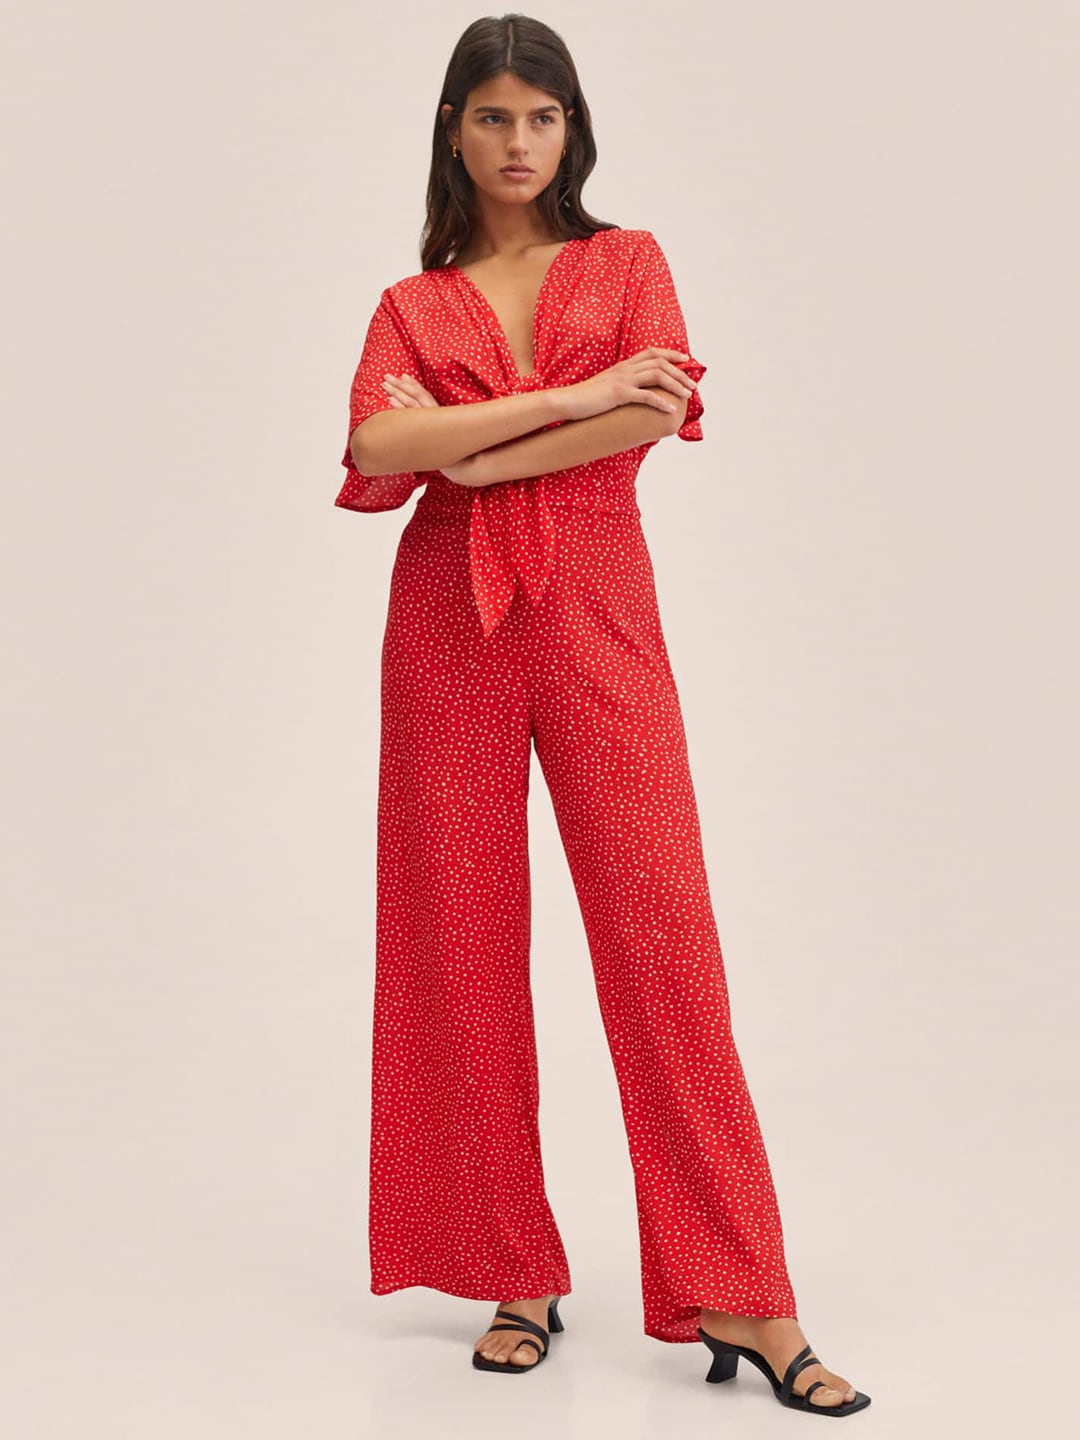 MANGO Red & Off White Printed Basic Jumpsuit Price in India